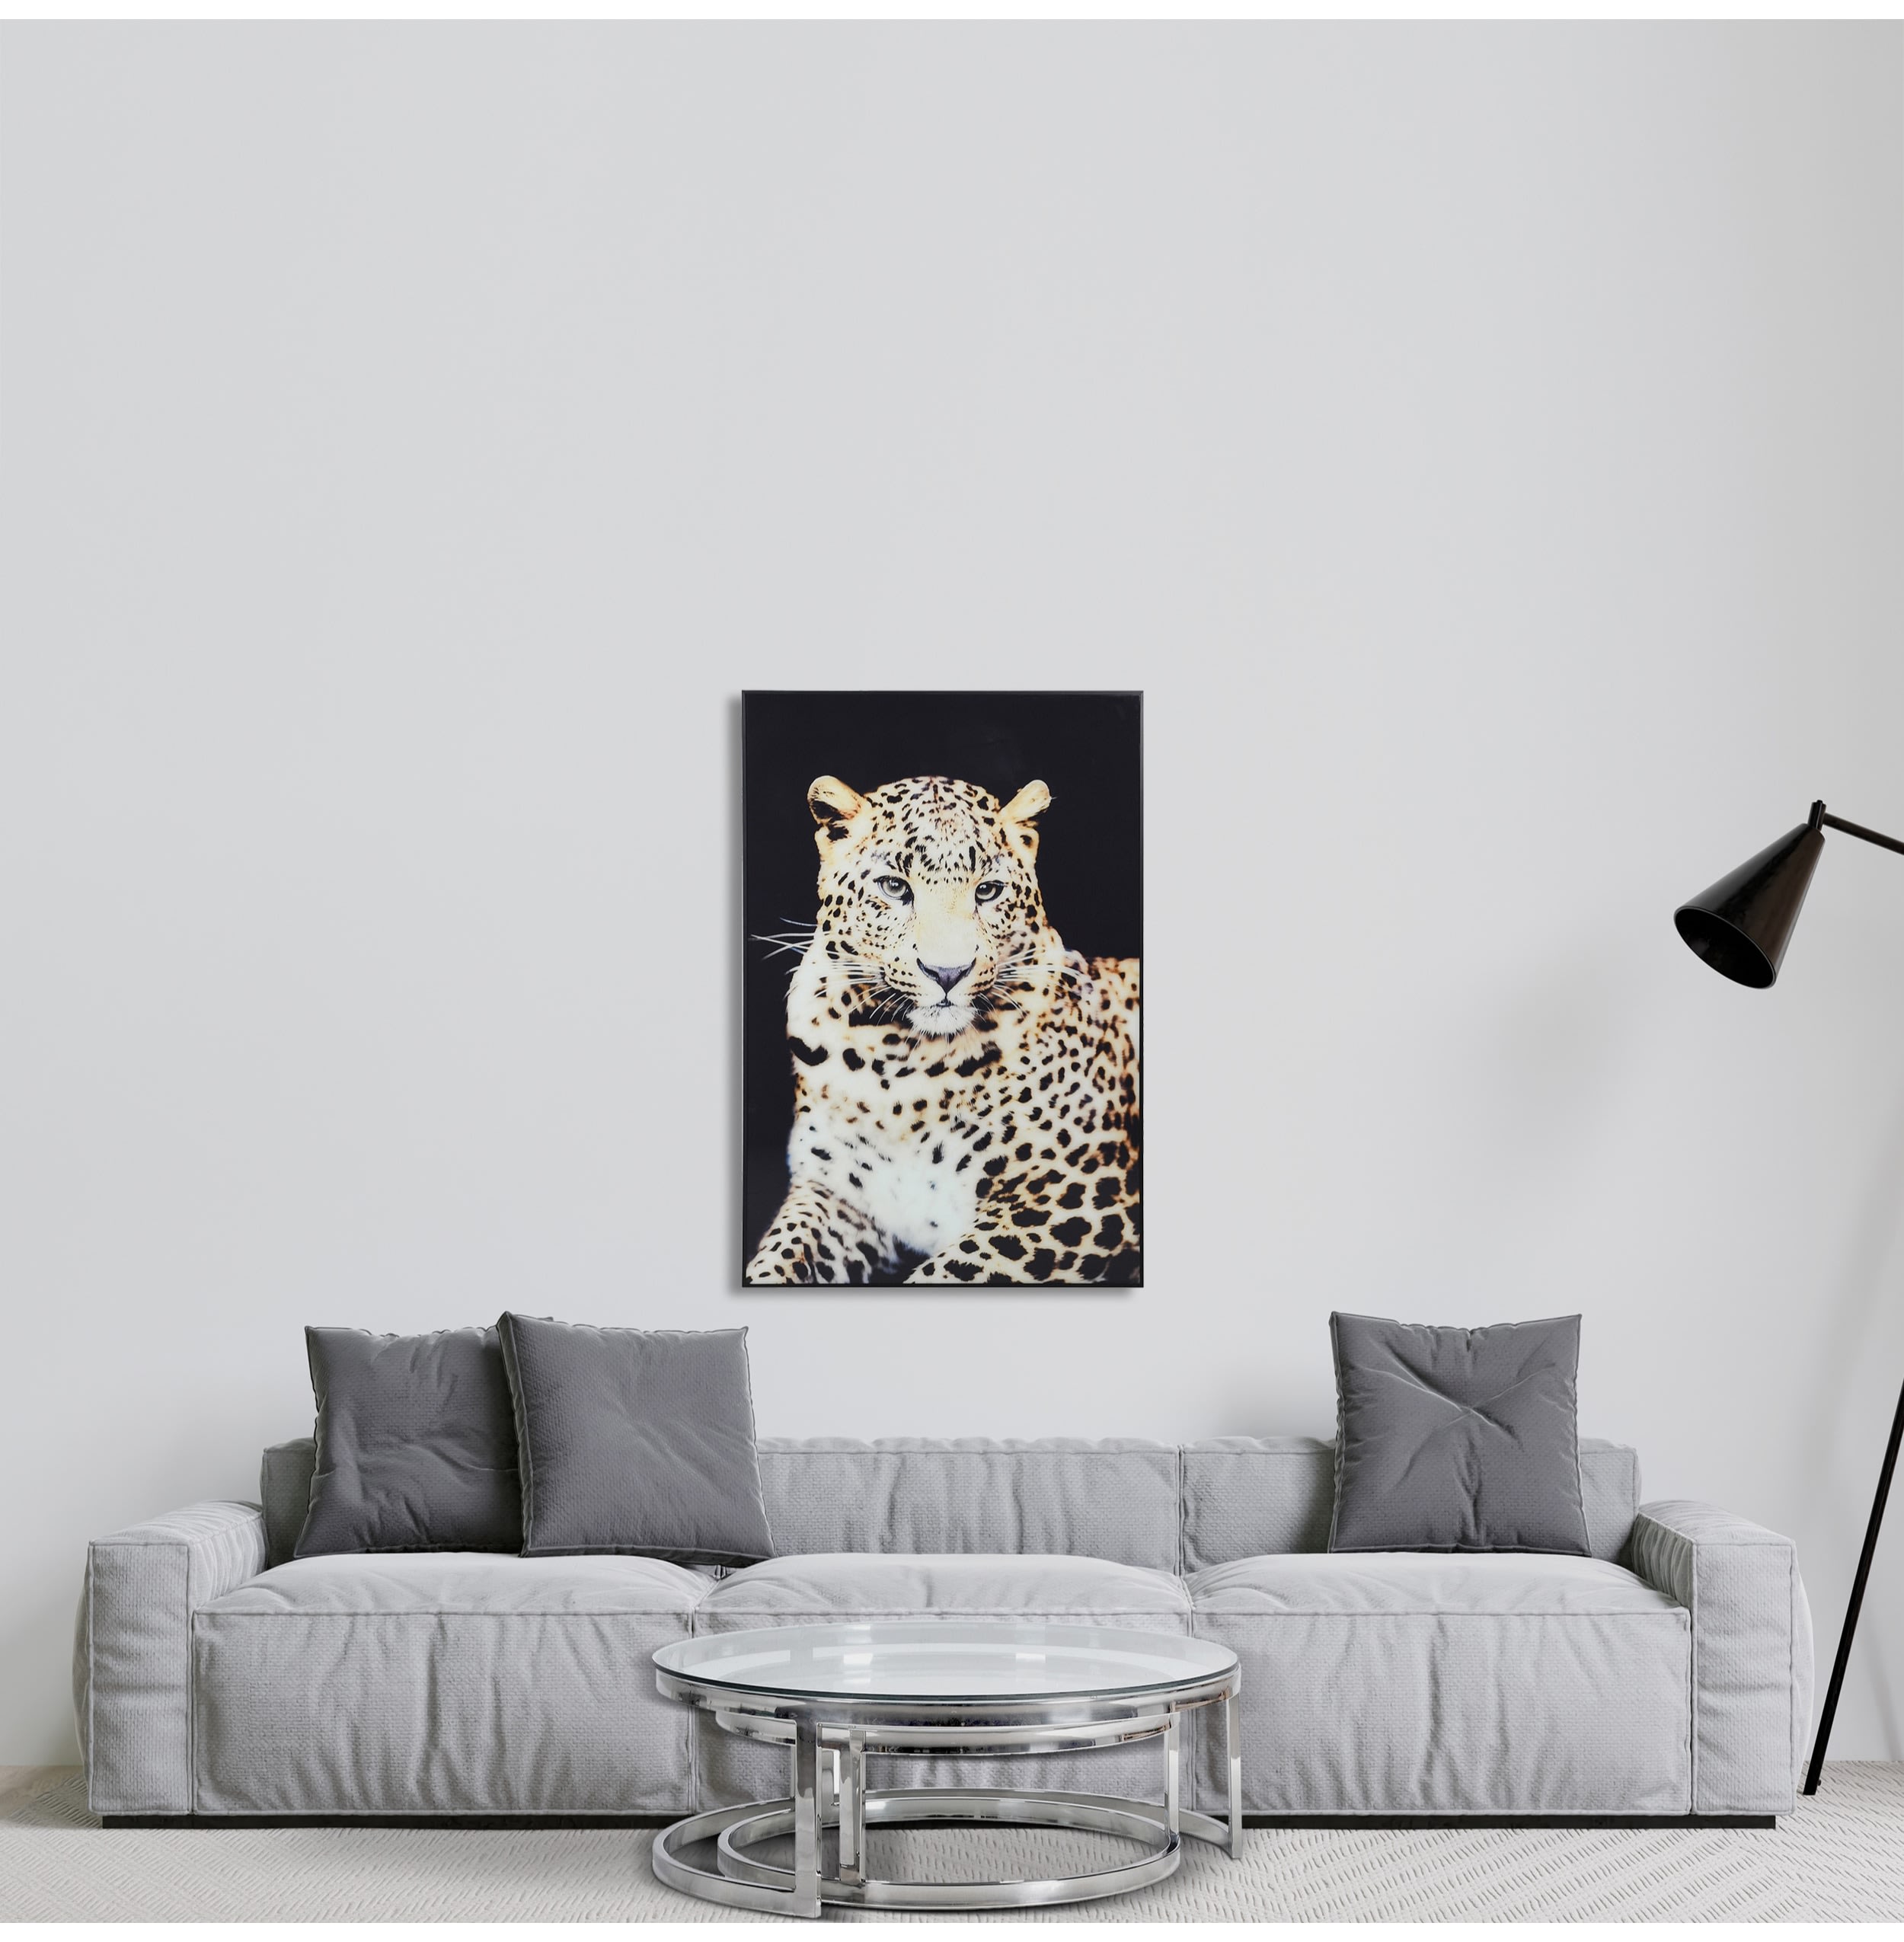 Lying Leopard Wall Picture